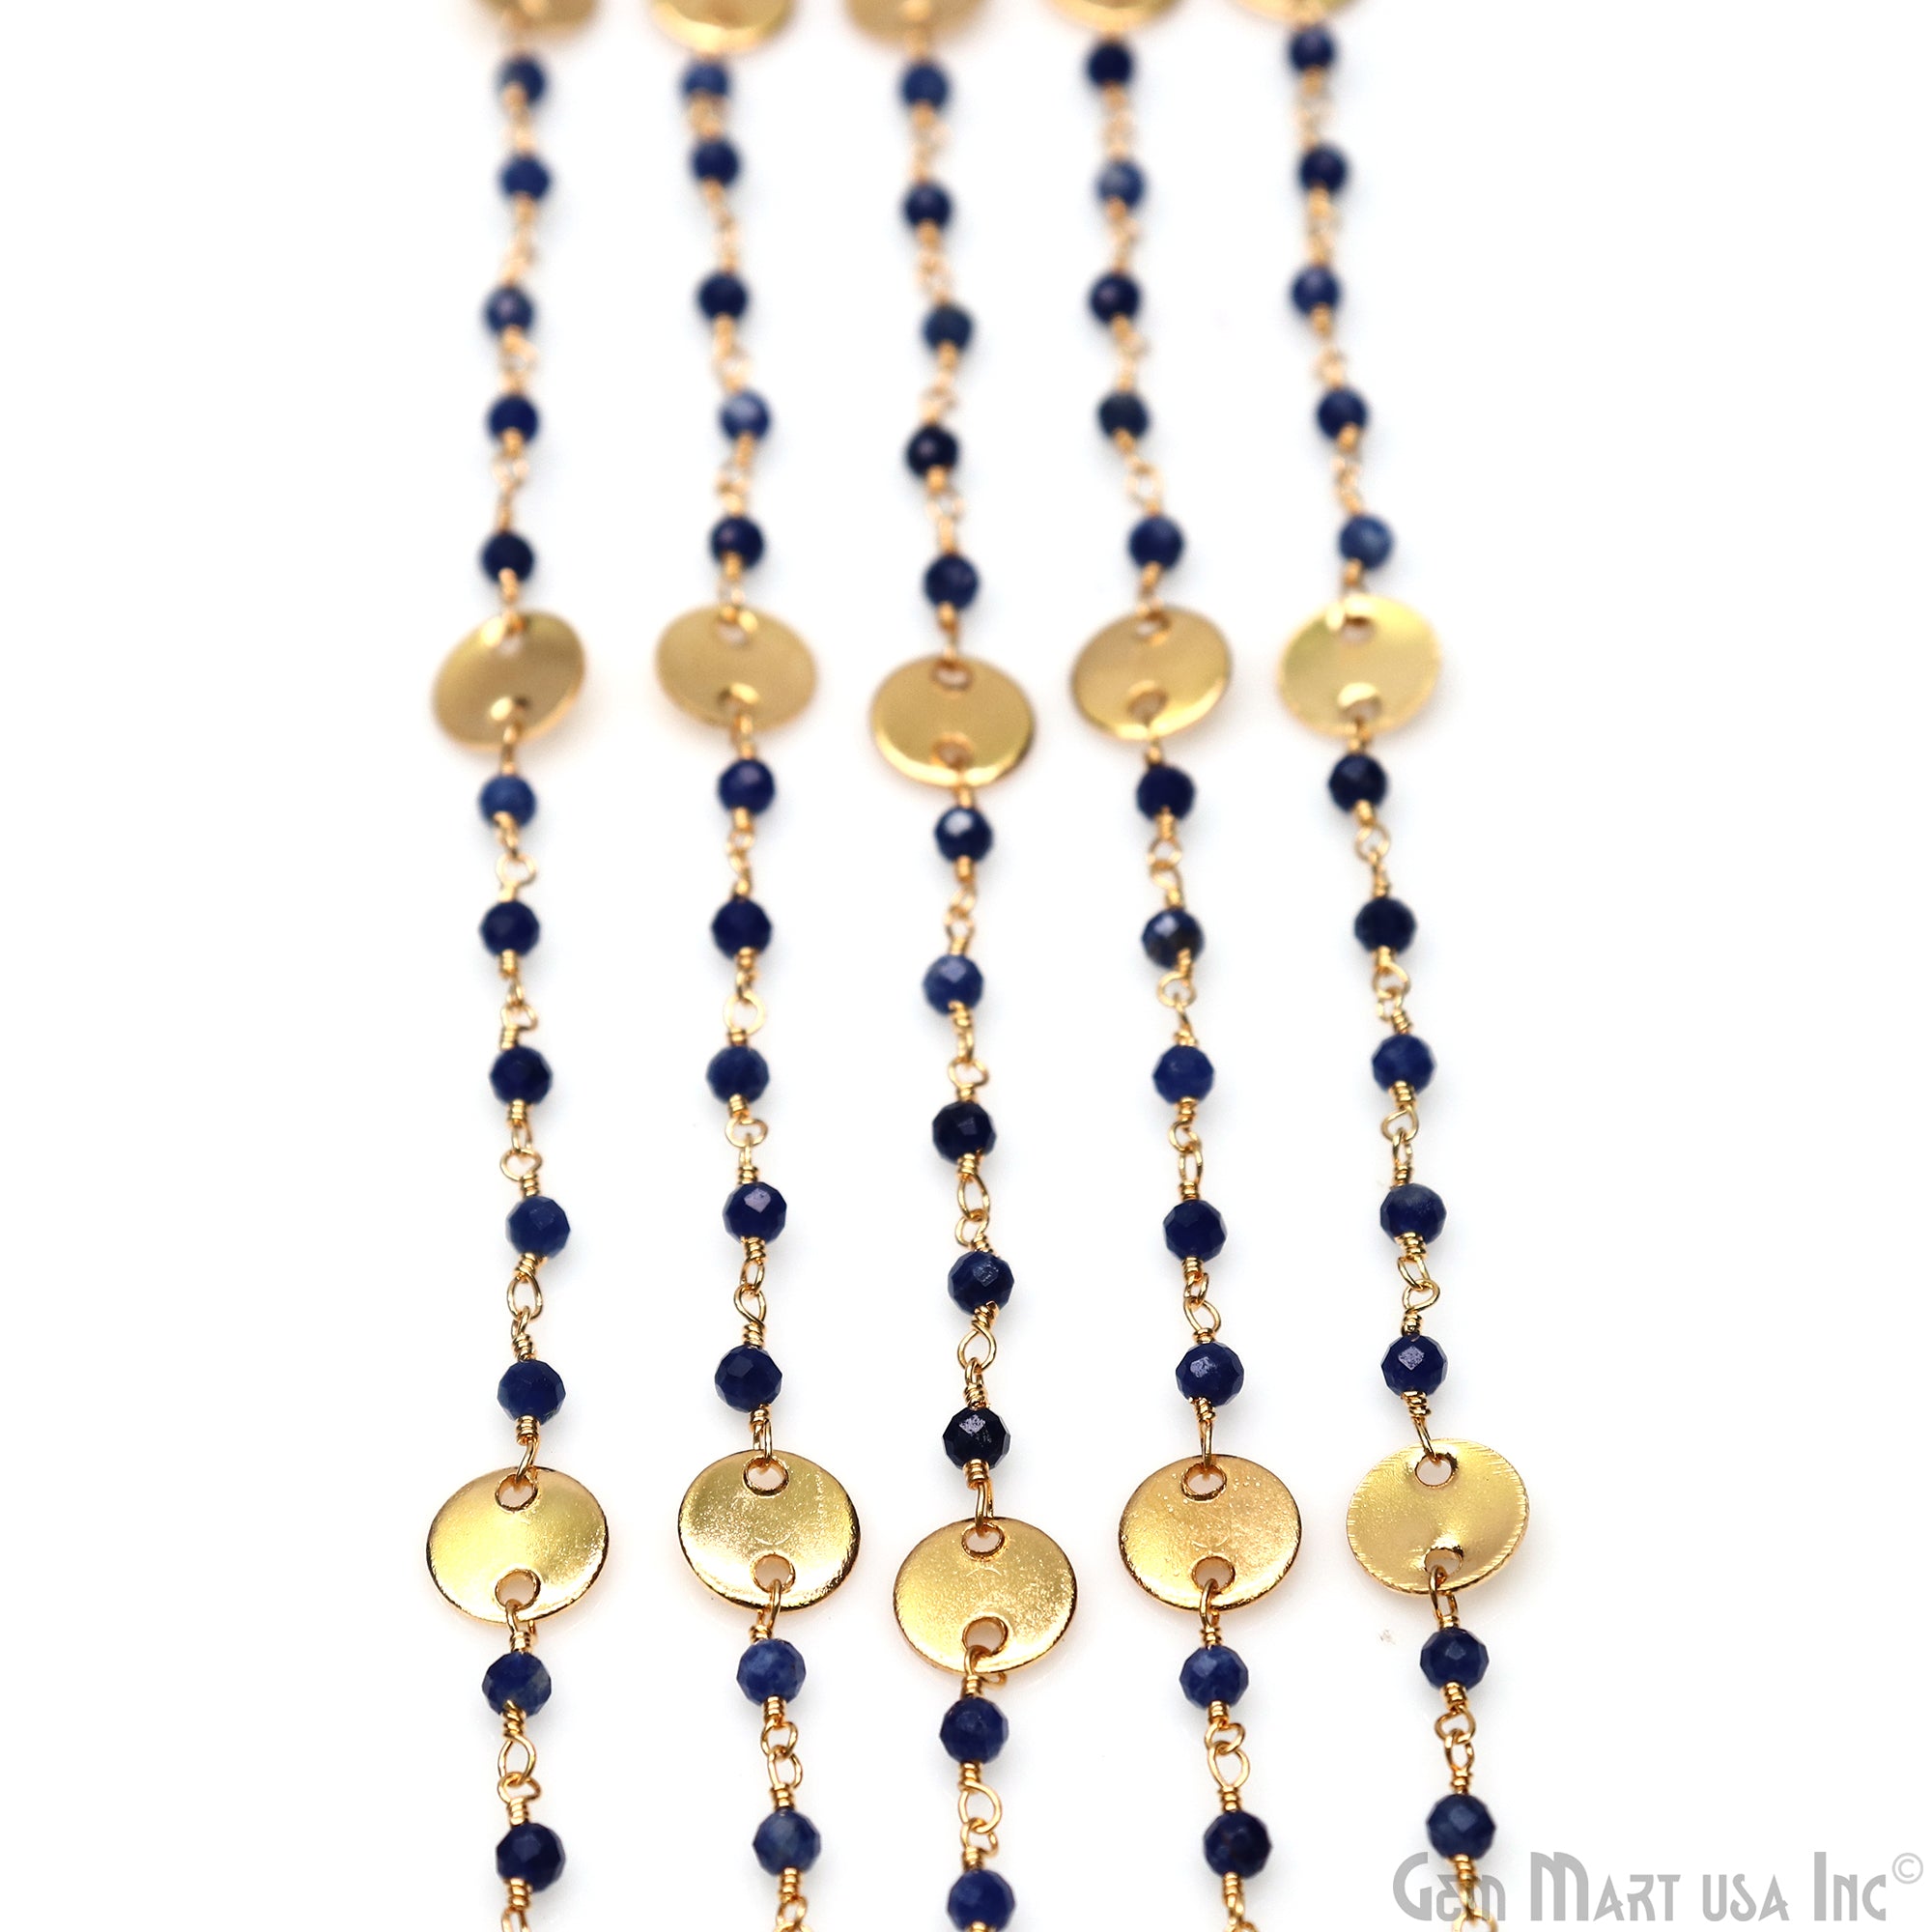 Lapis Faceted Round Beads & Finding Gold Plated Finding Rosary Chain